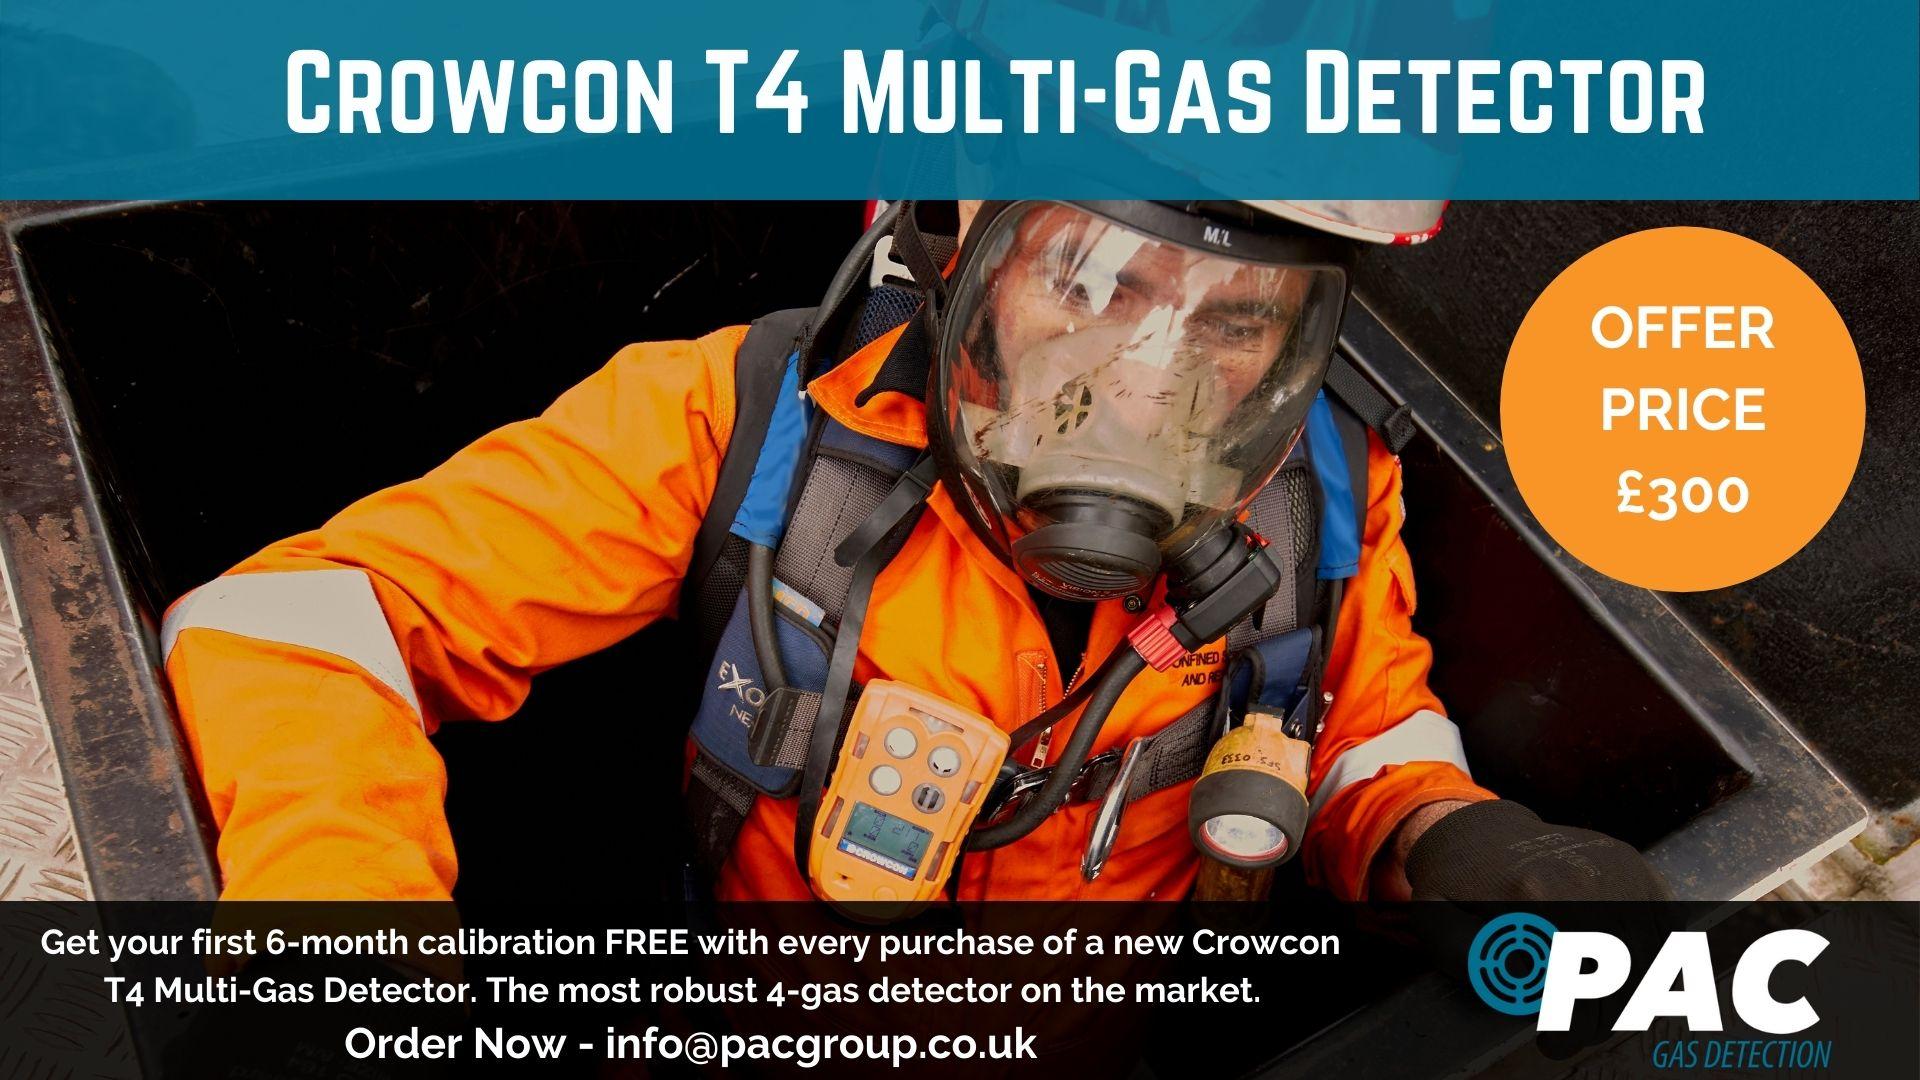 PAC Gas Detection Crowcon T4 Offer